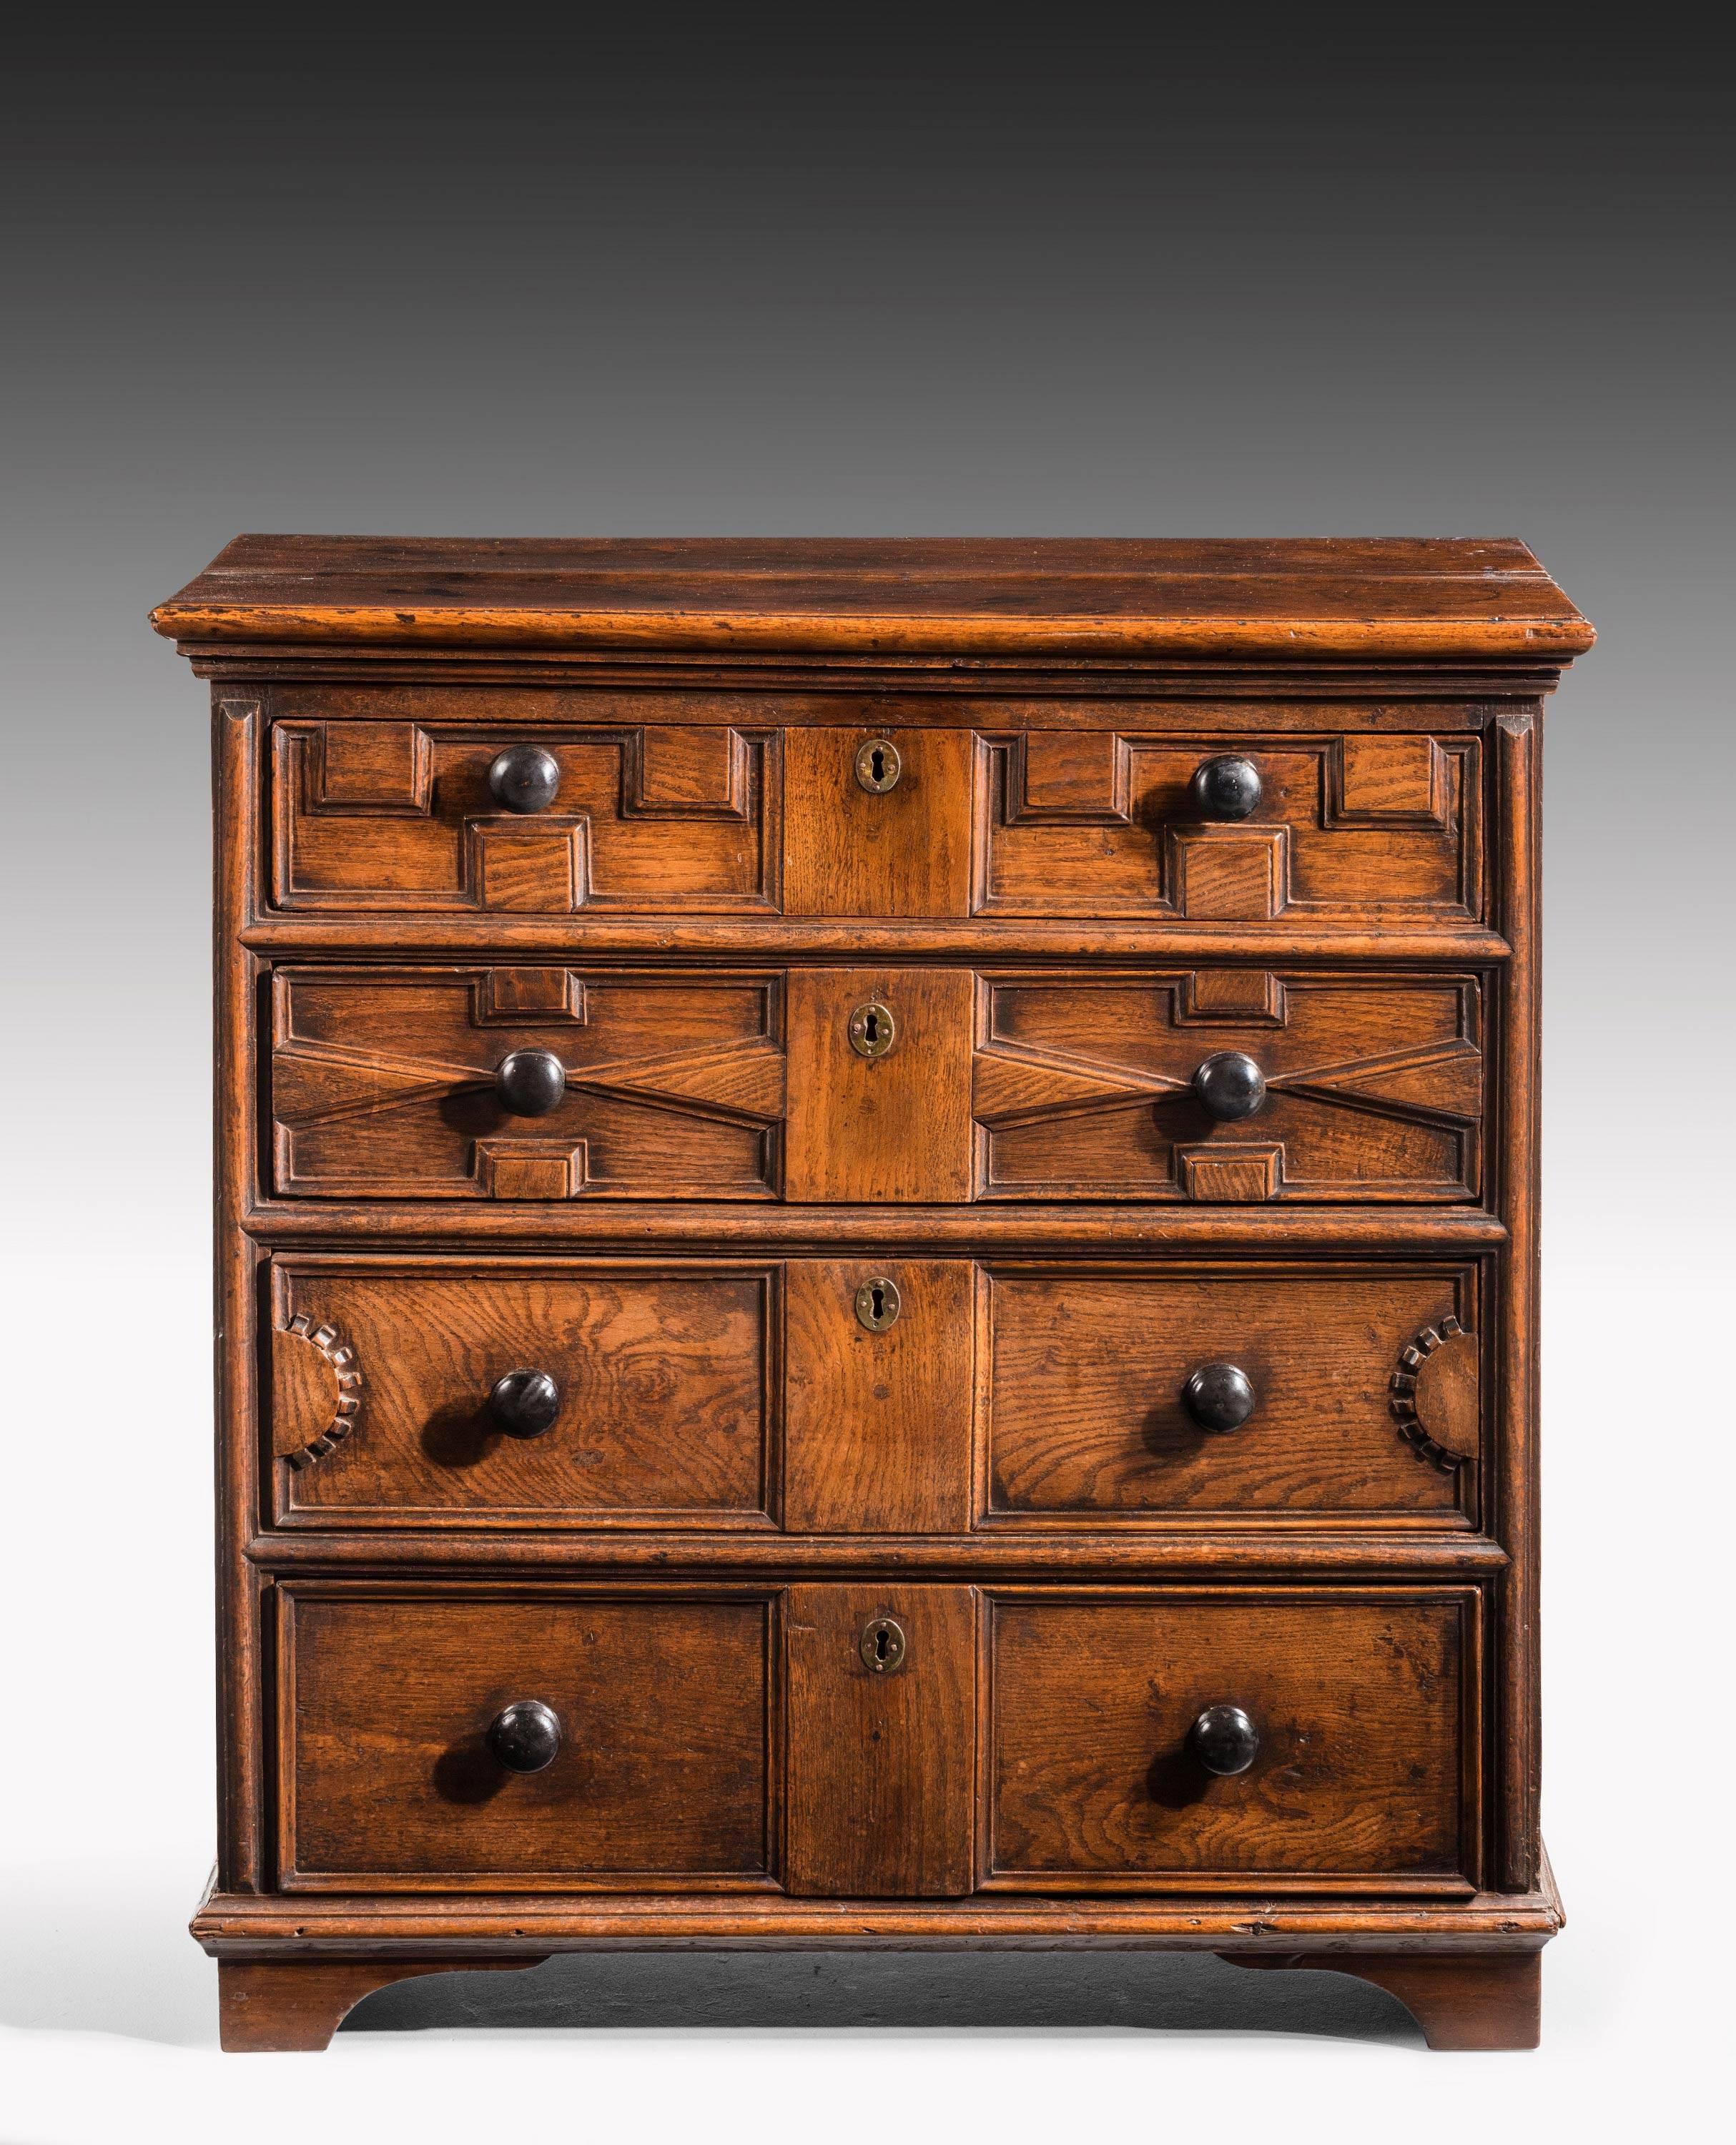 An attractive late 17th century oak chest of small proportions. The front elevations with Geometric patterns. Very good patina and color, the top particularly so.

 